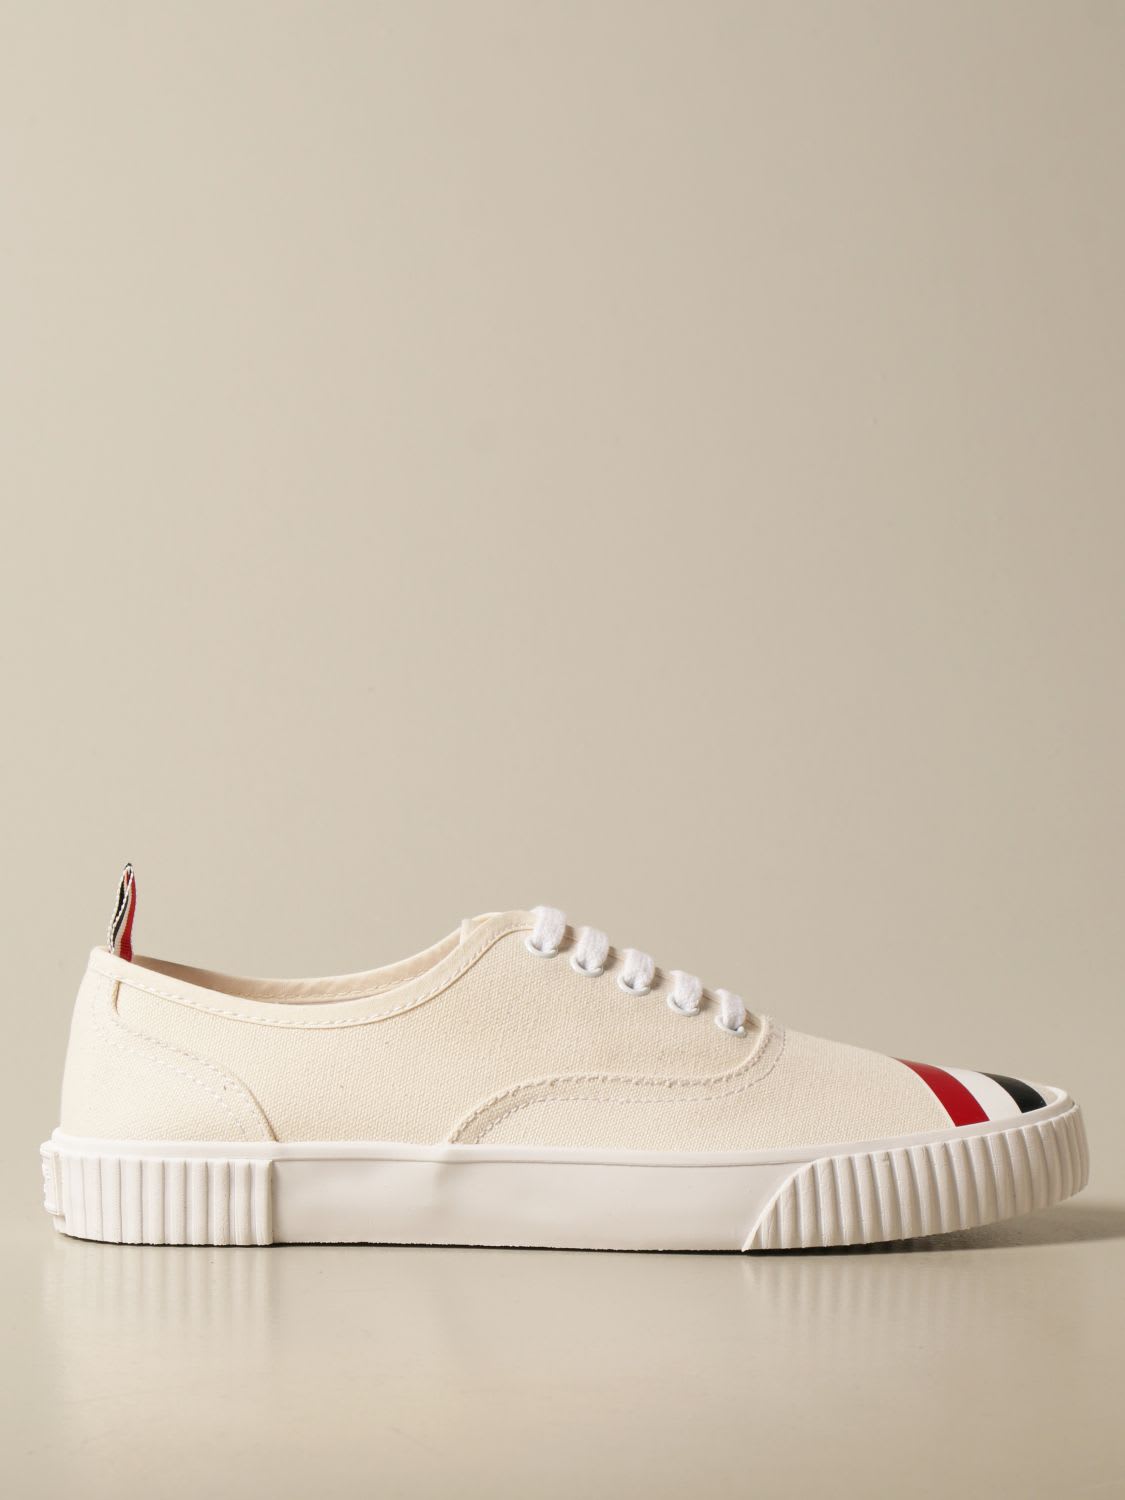 THOM BROWNE SNEAKERS IN COTTON CANVAS,MFD201A 06555 114